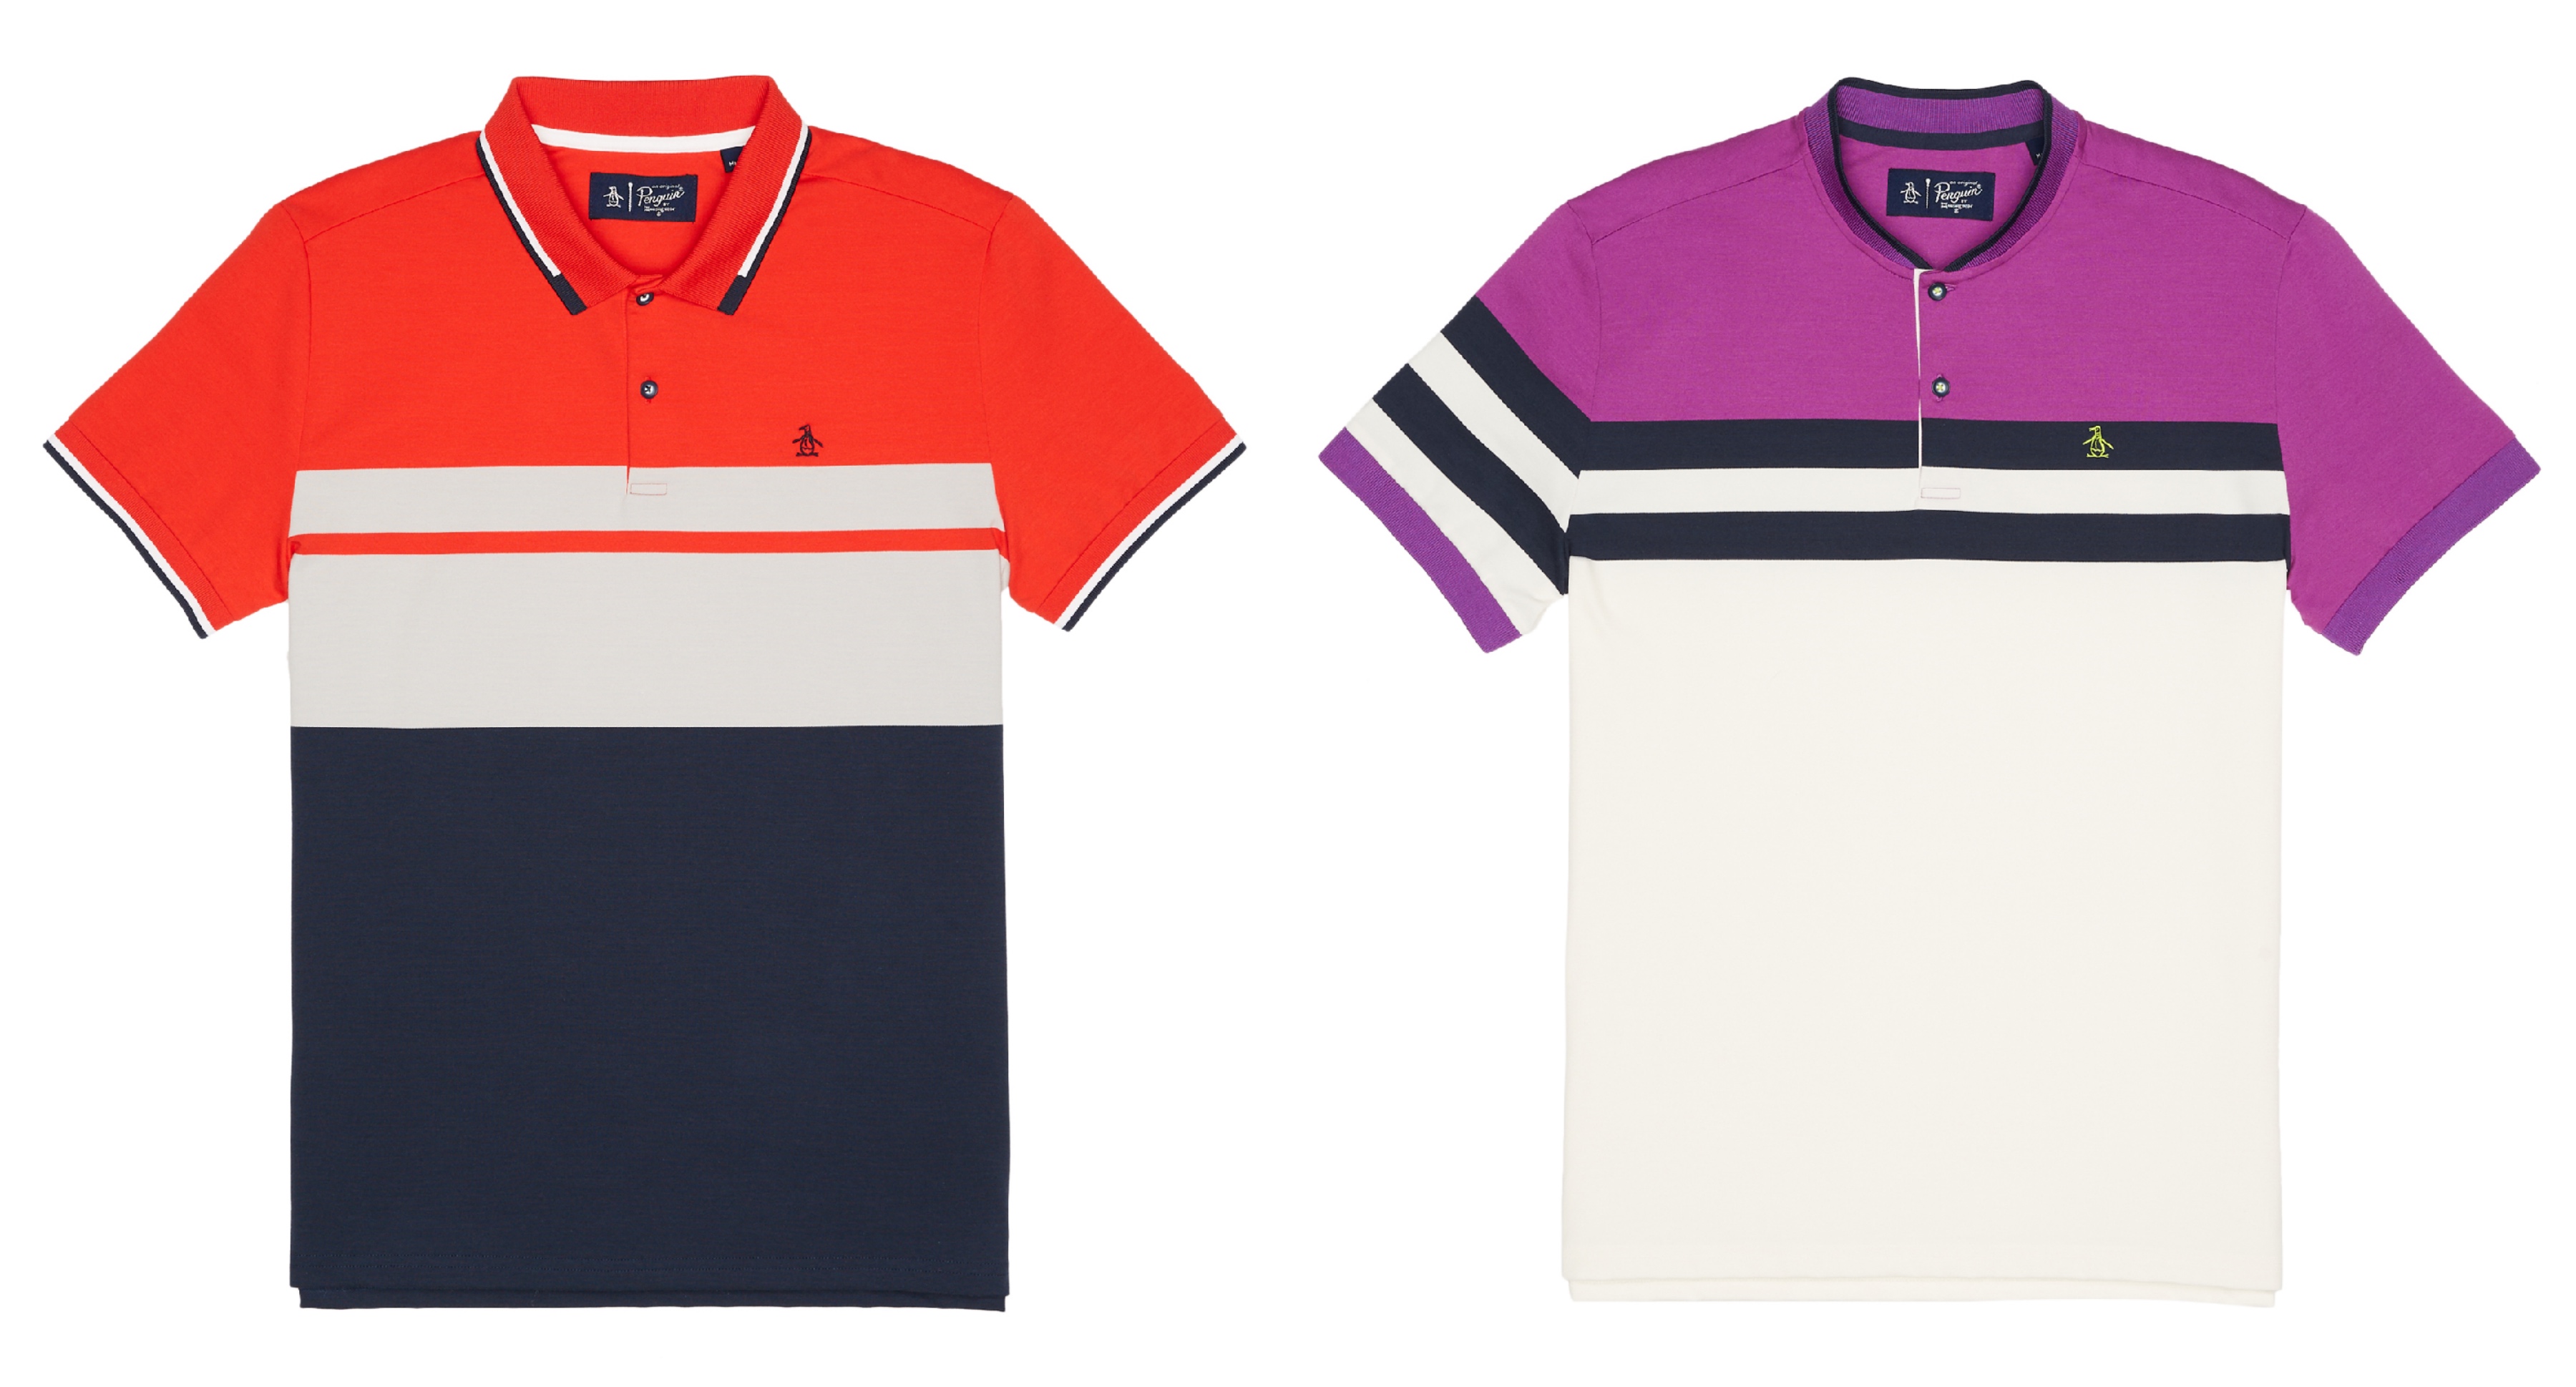 Original Penguin Launches New Line Of Tailored And Slim-Cut Golf ...